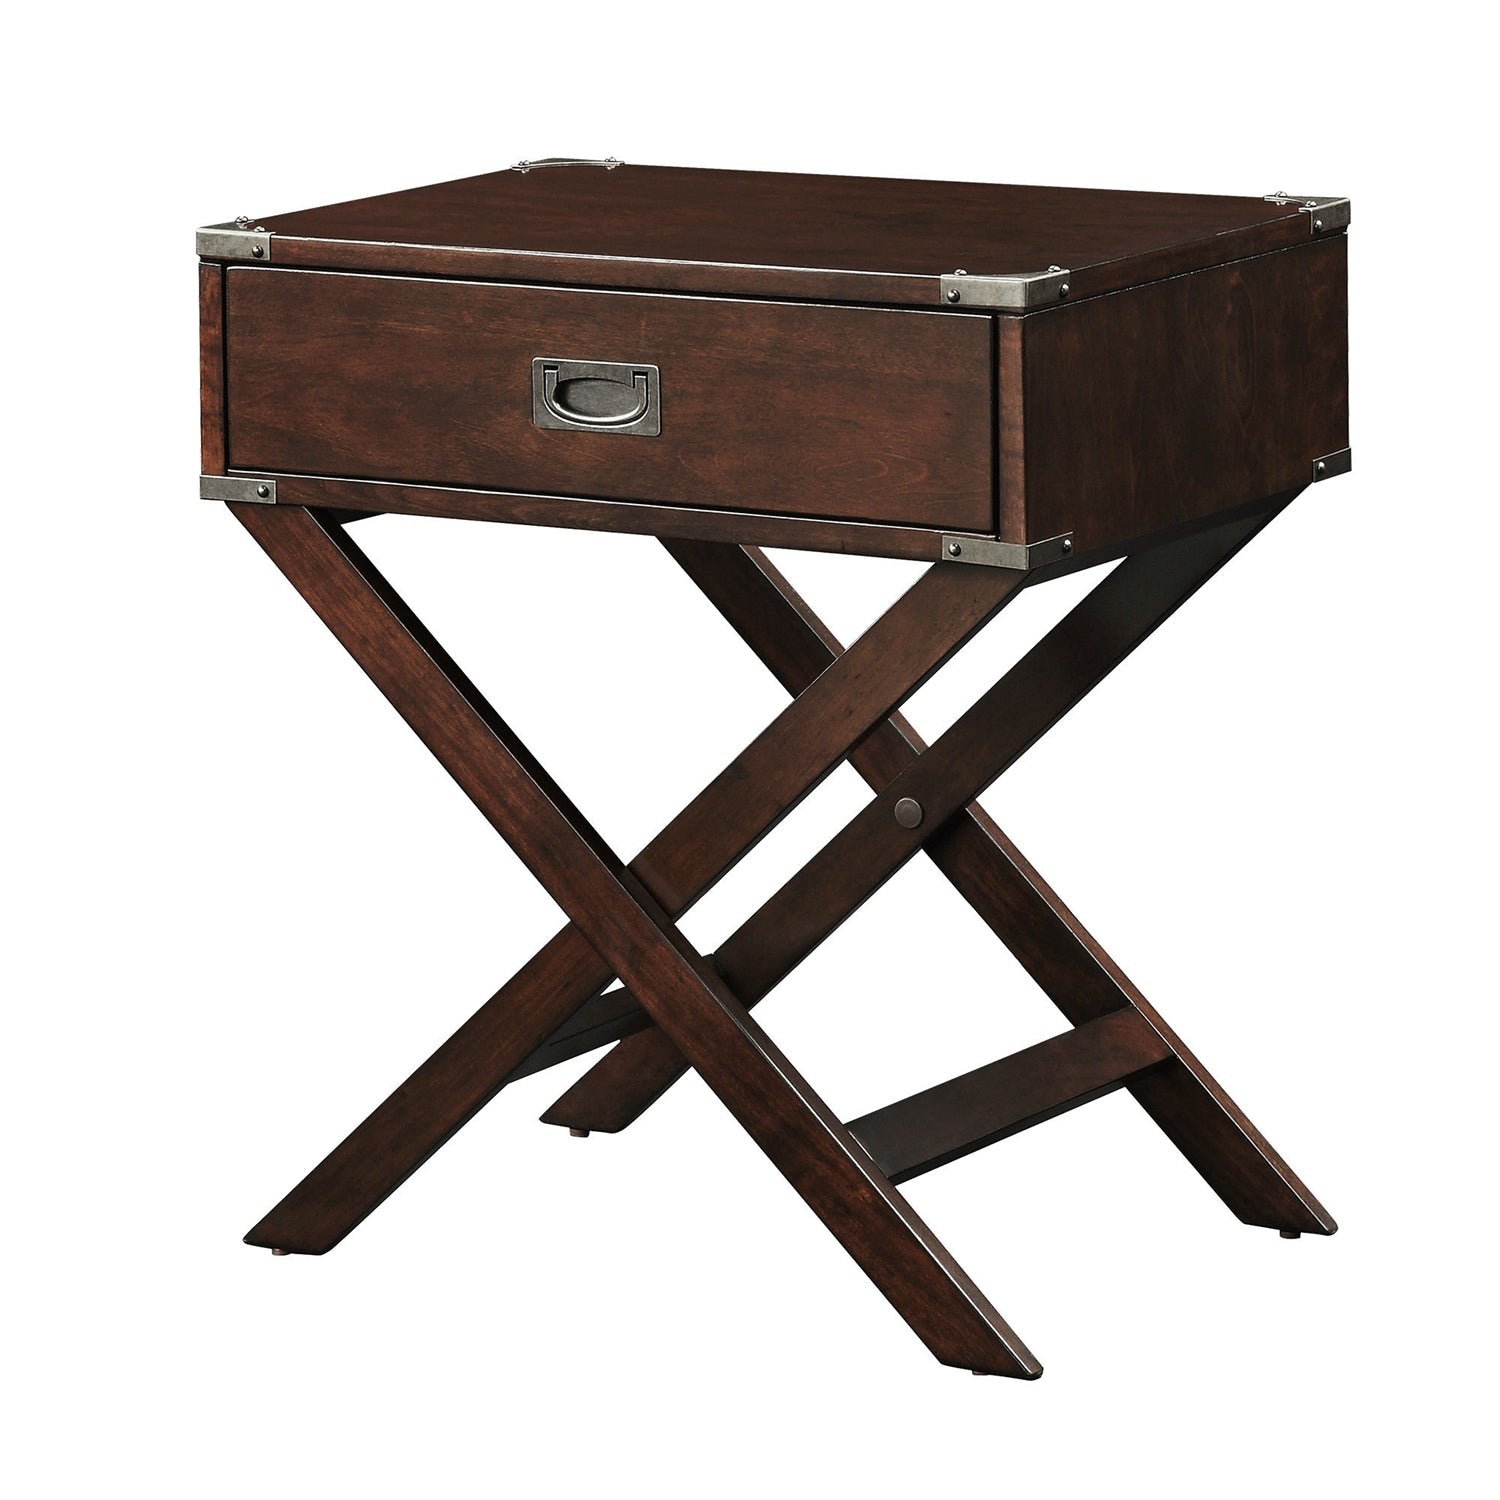 Living Room > Coffee Tables - Espresso Brown Wood 1-Drawer End Table Nightstand With X Legs